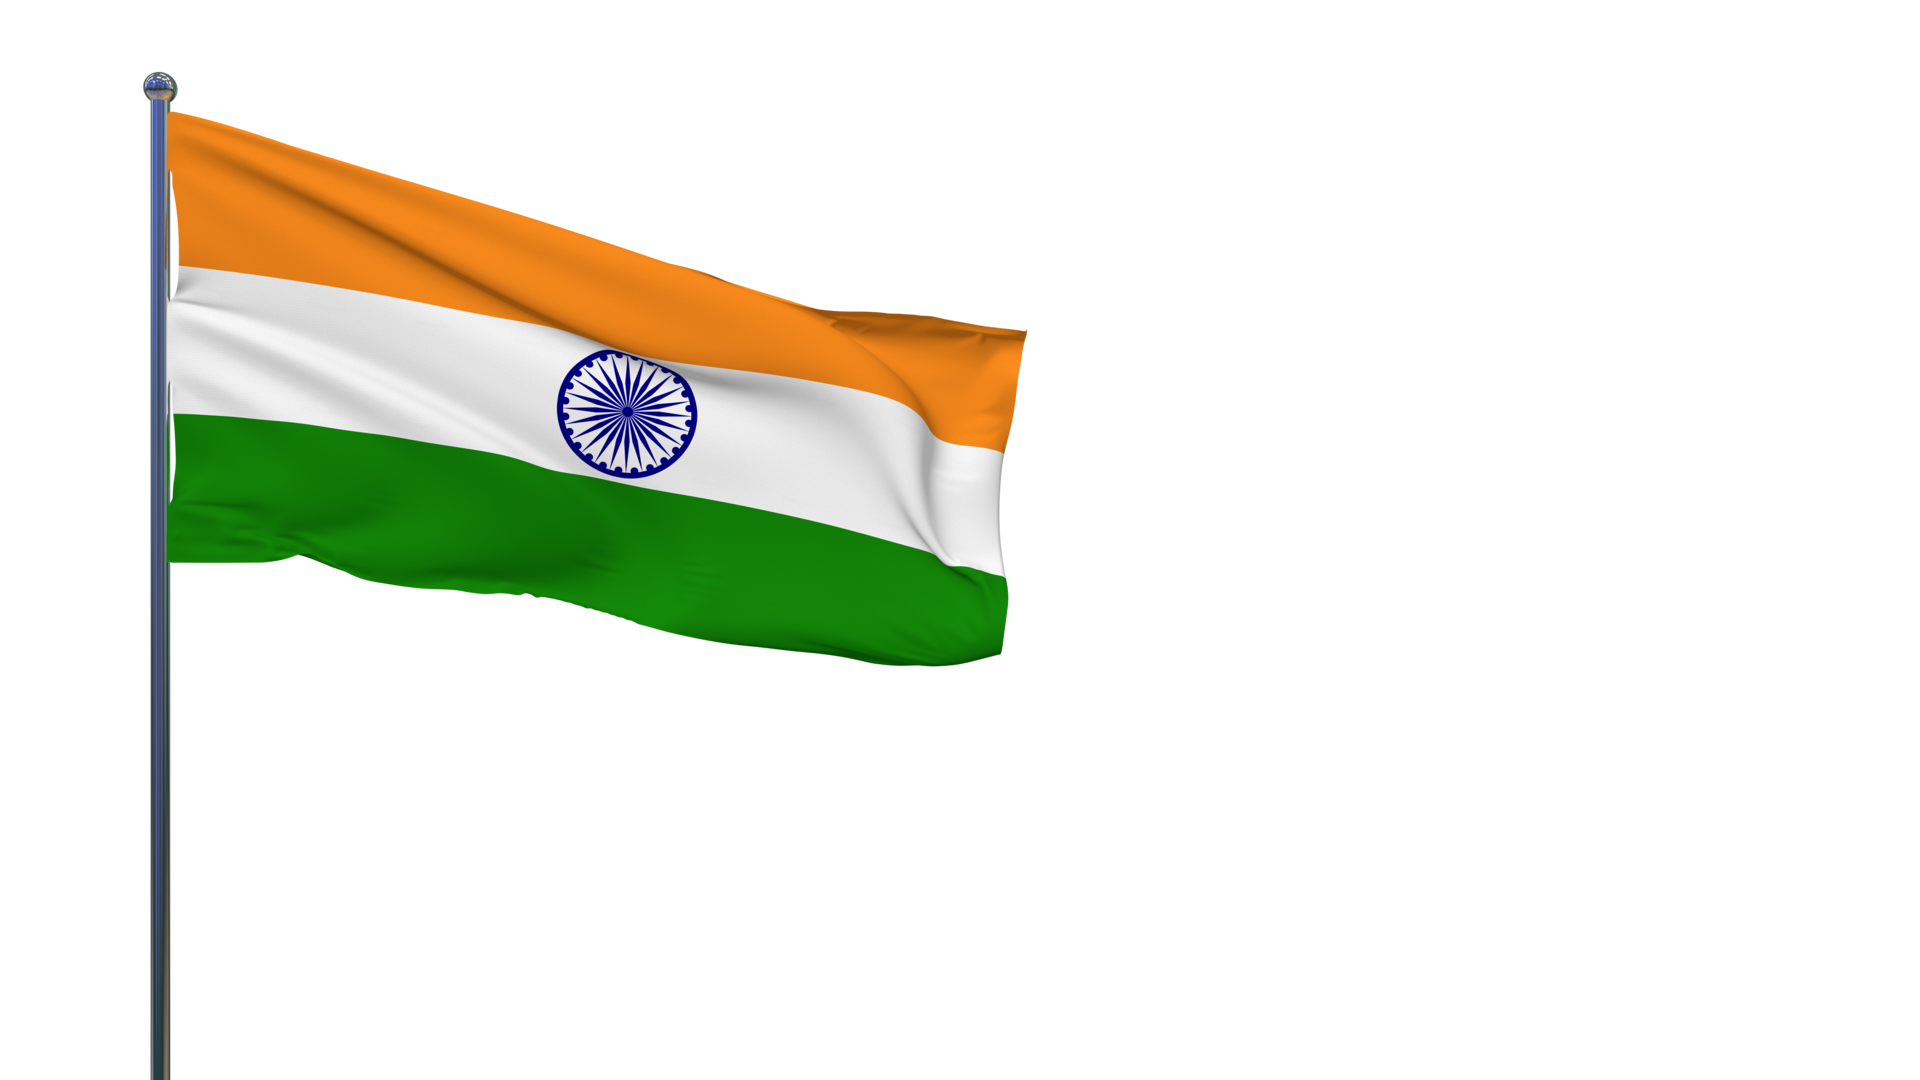 Free India Flag Waving in The Wind 3D Rendering, National Day, Independence  Day 13824937 PNG with Transparent Background